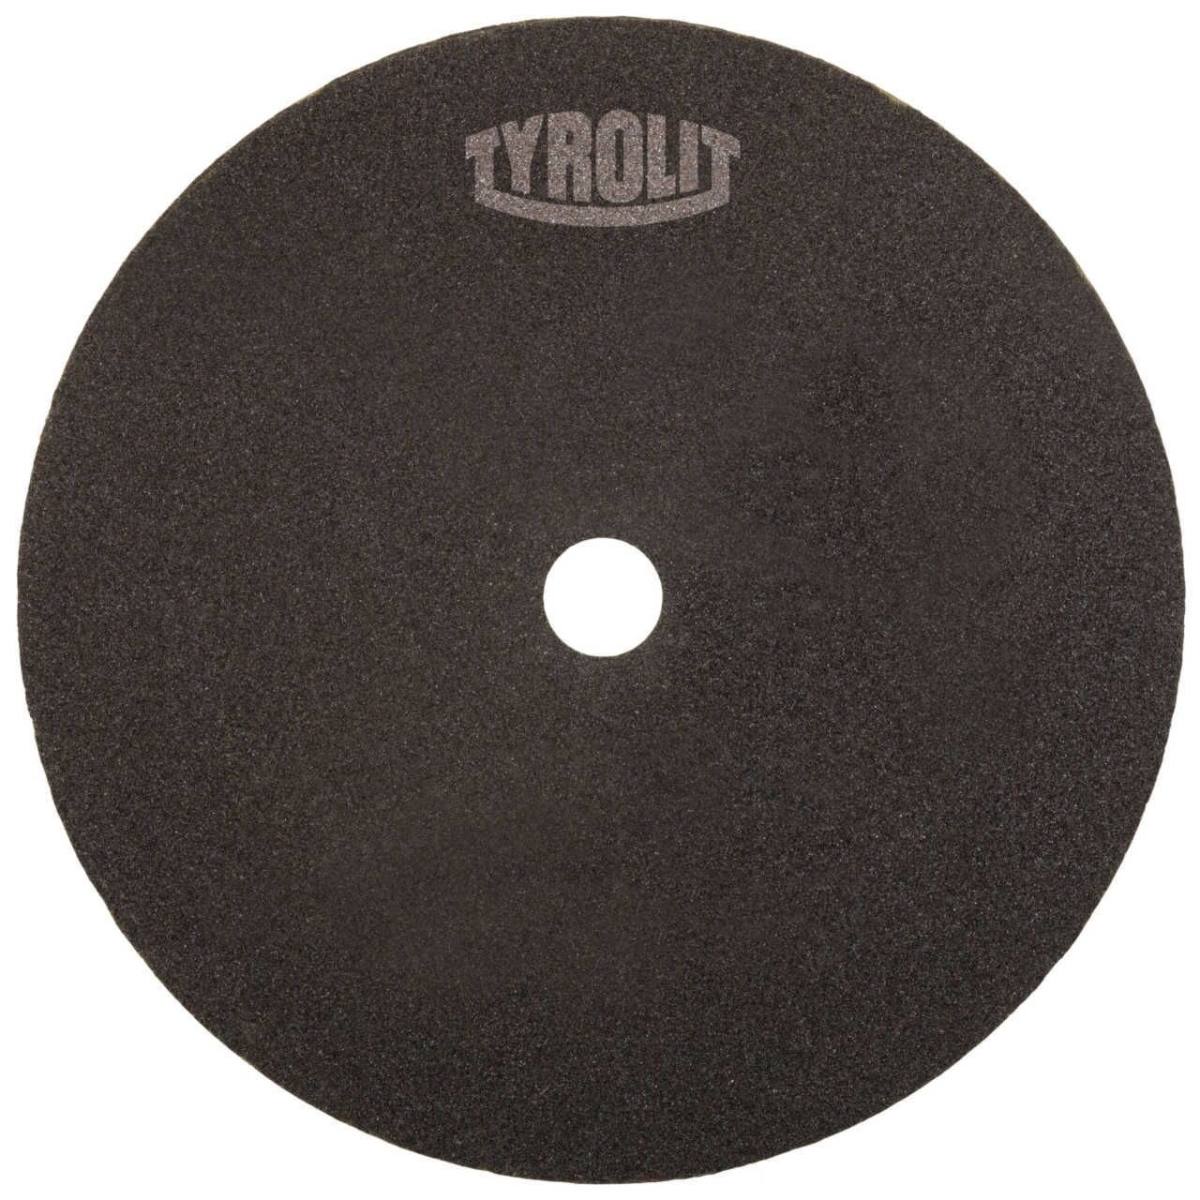 Tyrolit Cutting disc for cutting and saw sharpening DxDxH 150x2x20 For steel and HSS, shape: 41N - straight version (non-woven cutting disc), Art. 32023